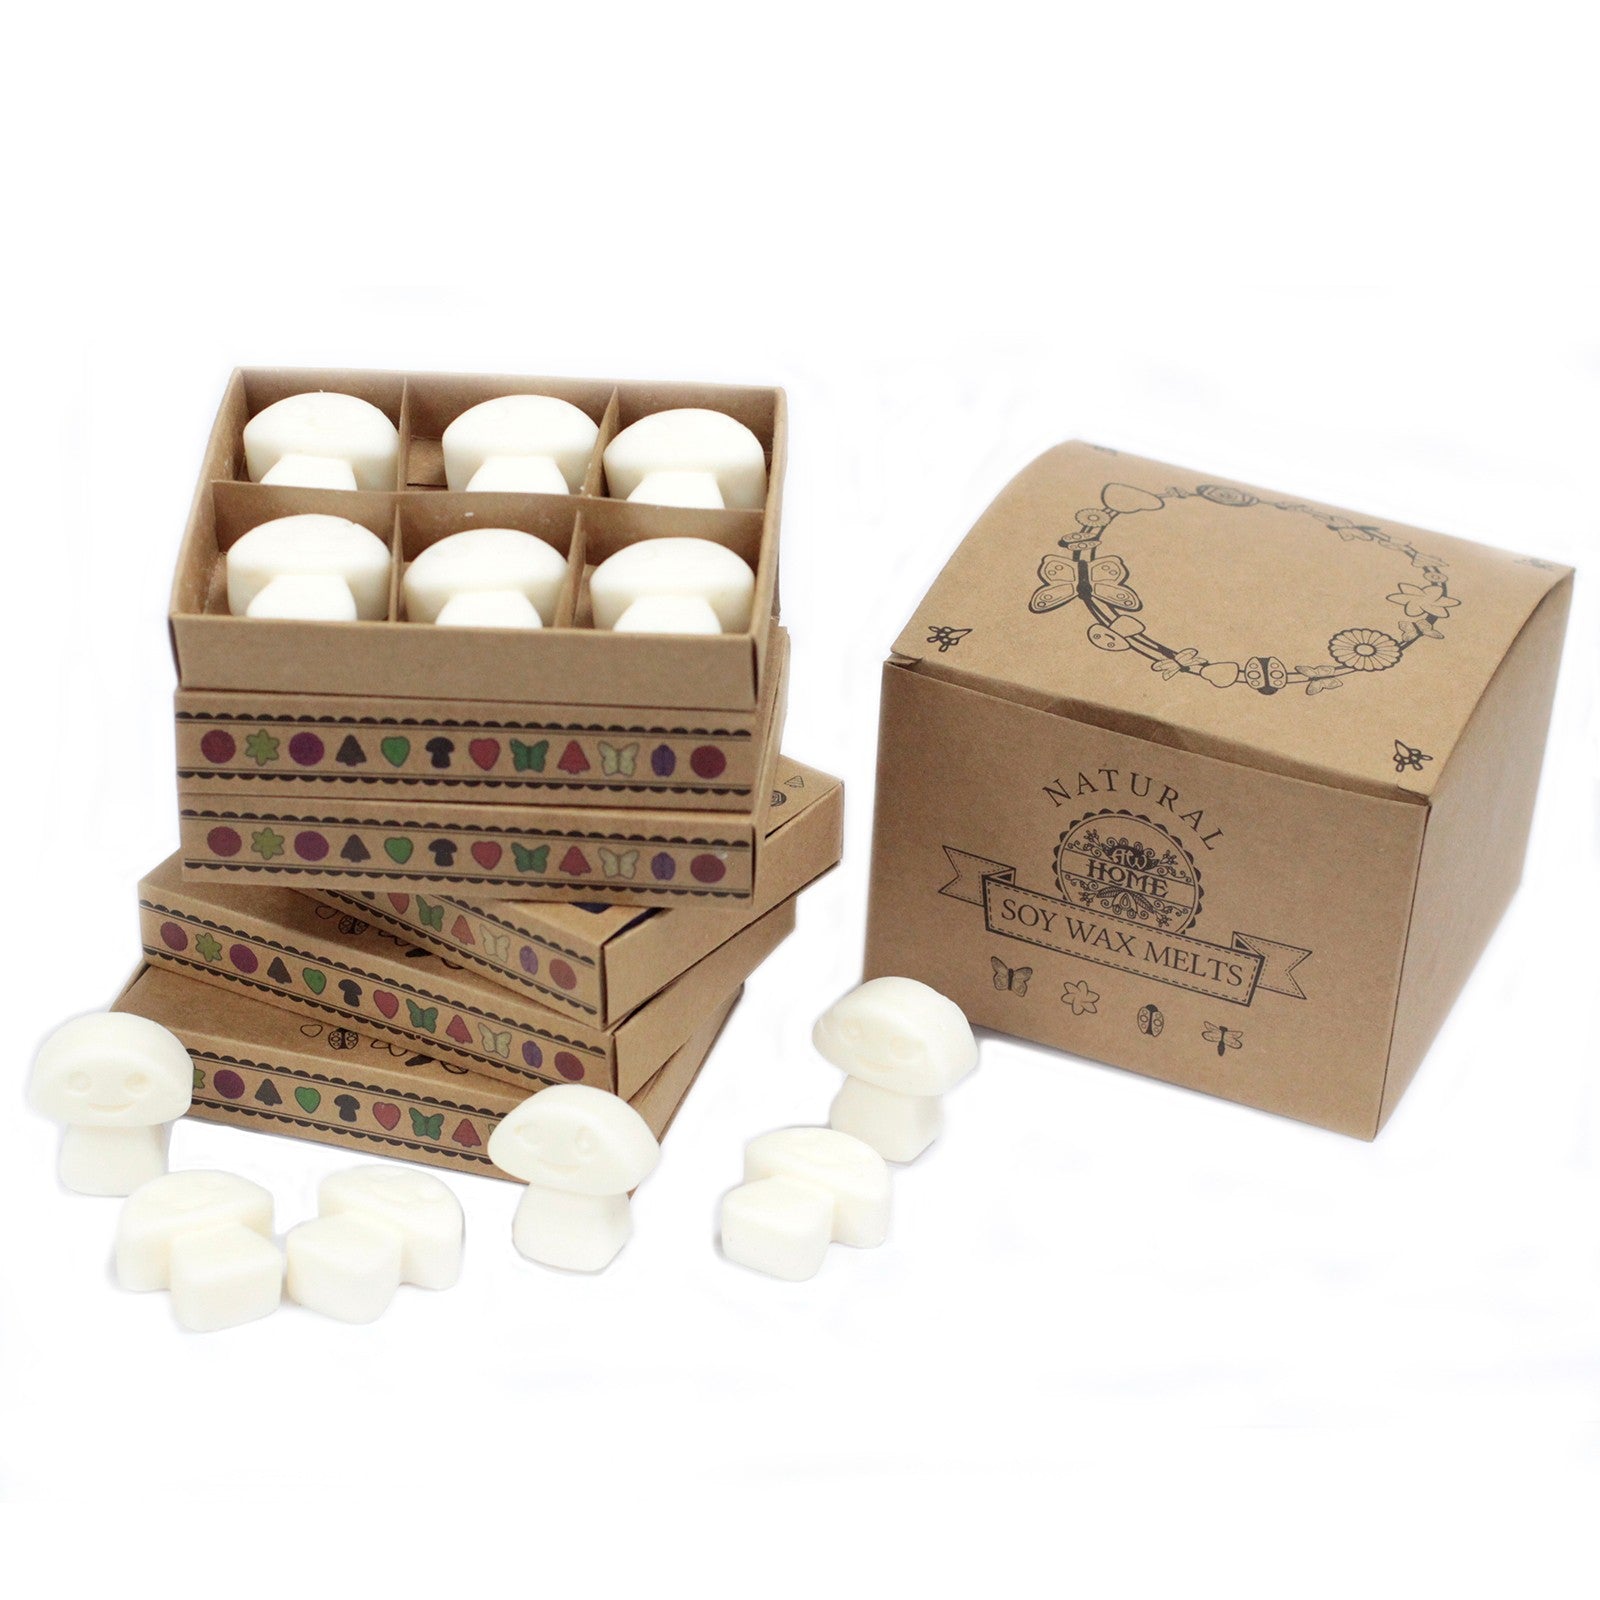 View Box of 6 Wax Melts White Musk information